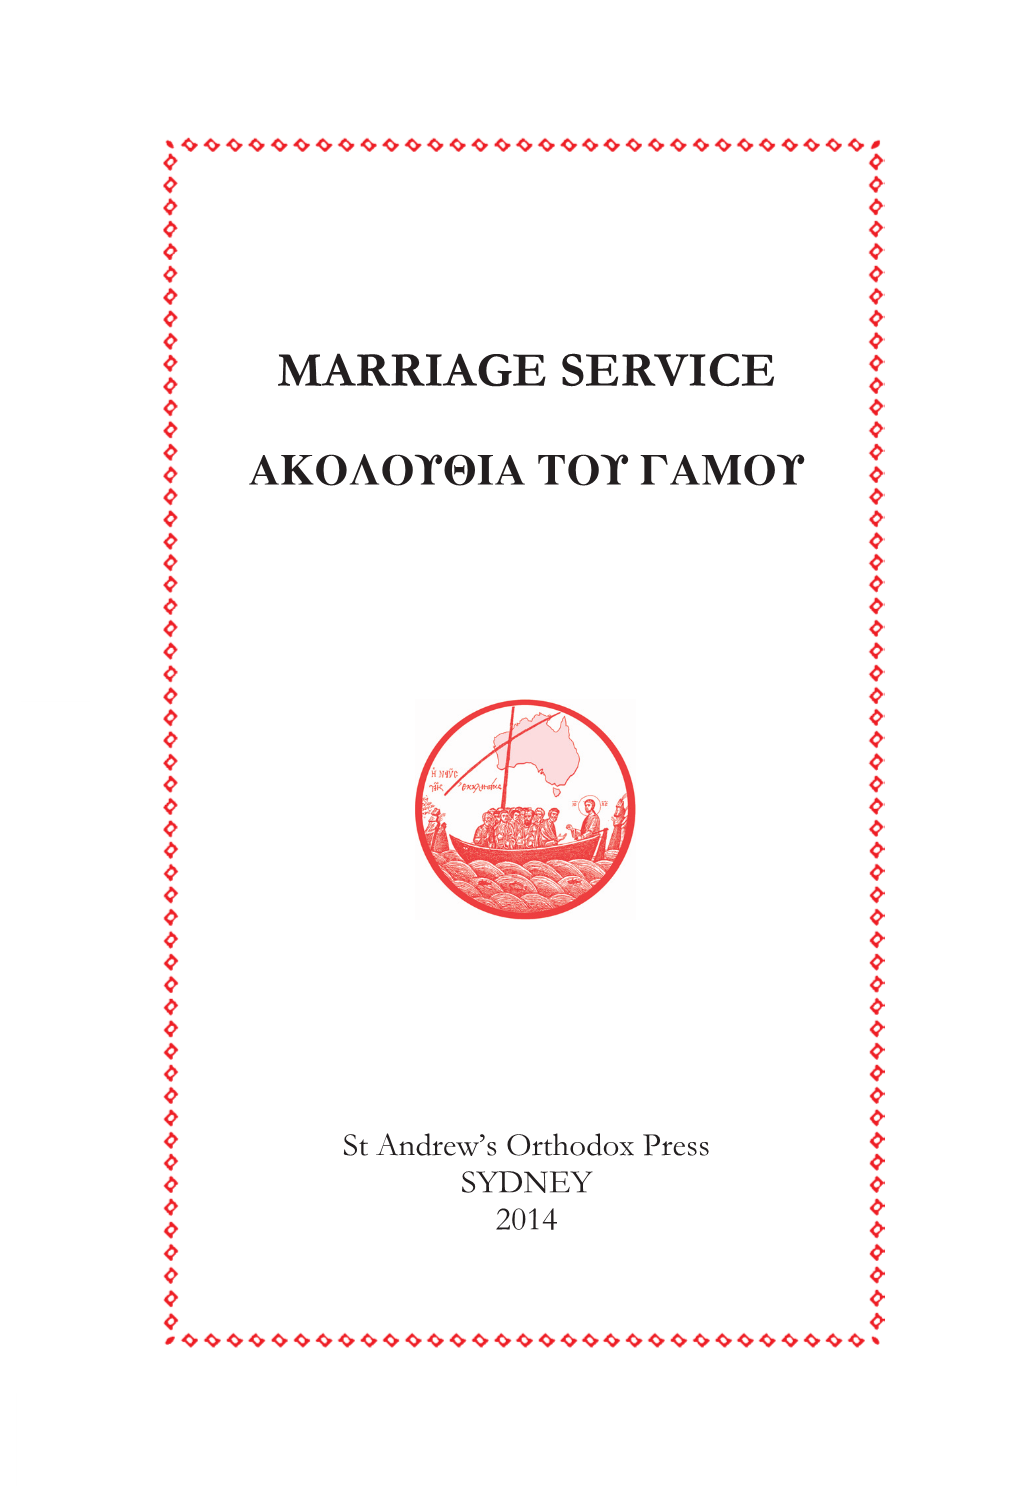 Marriage Service